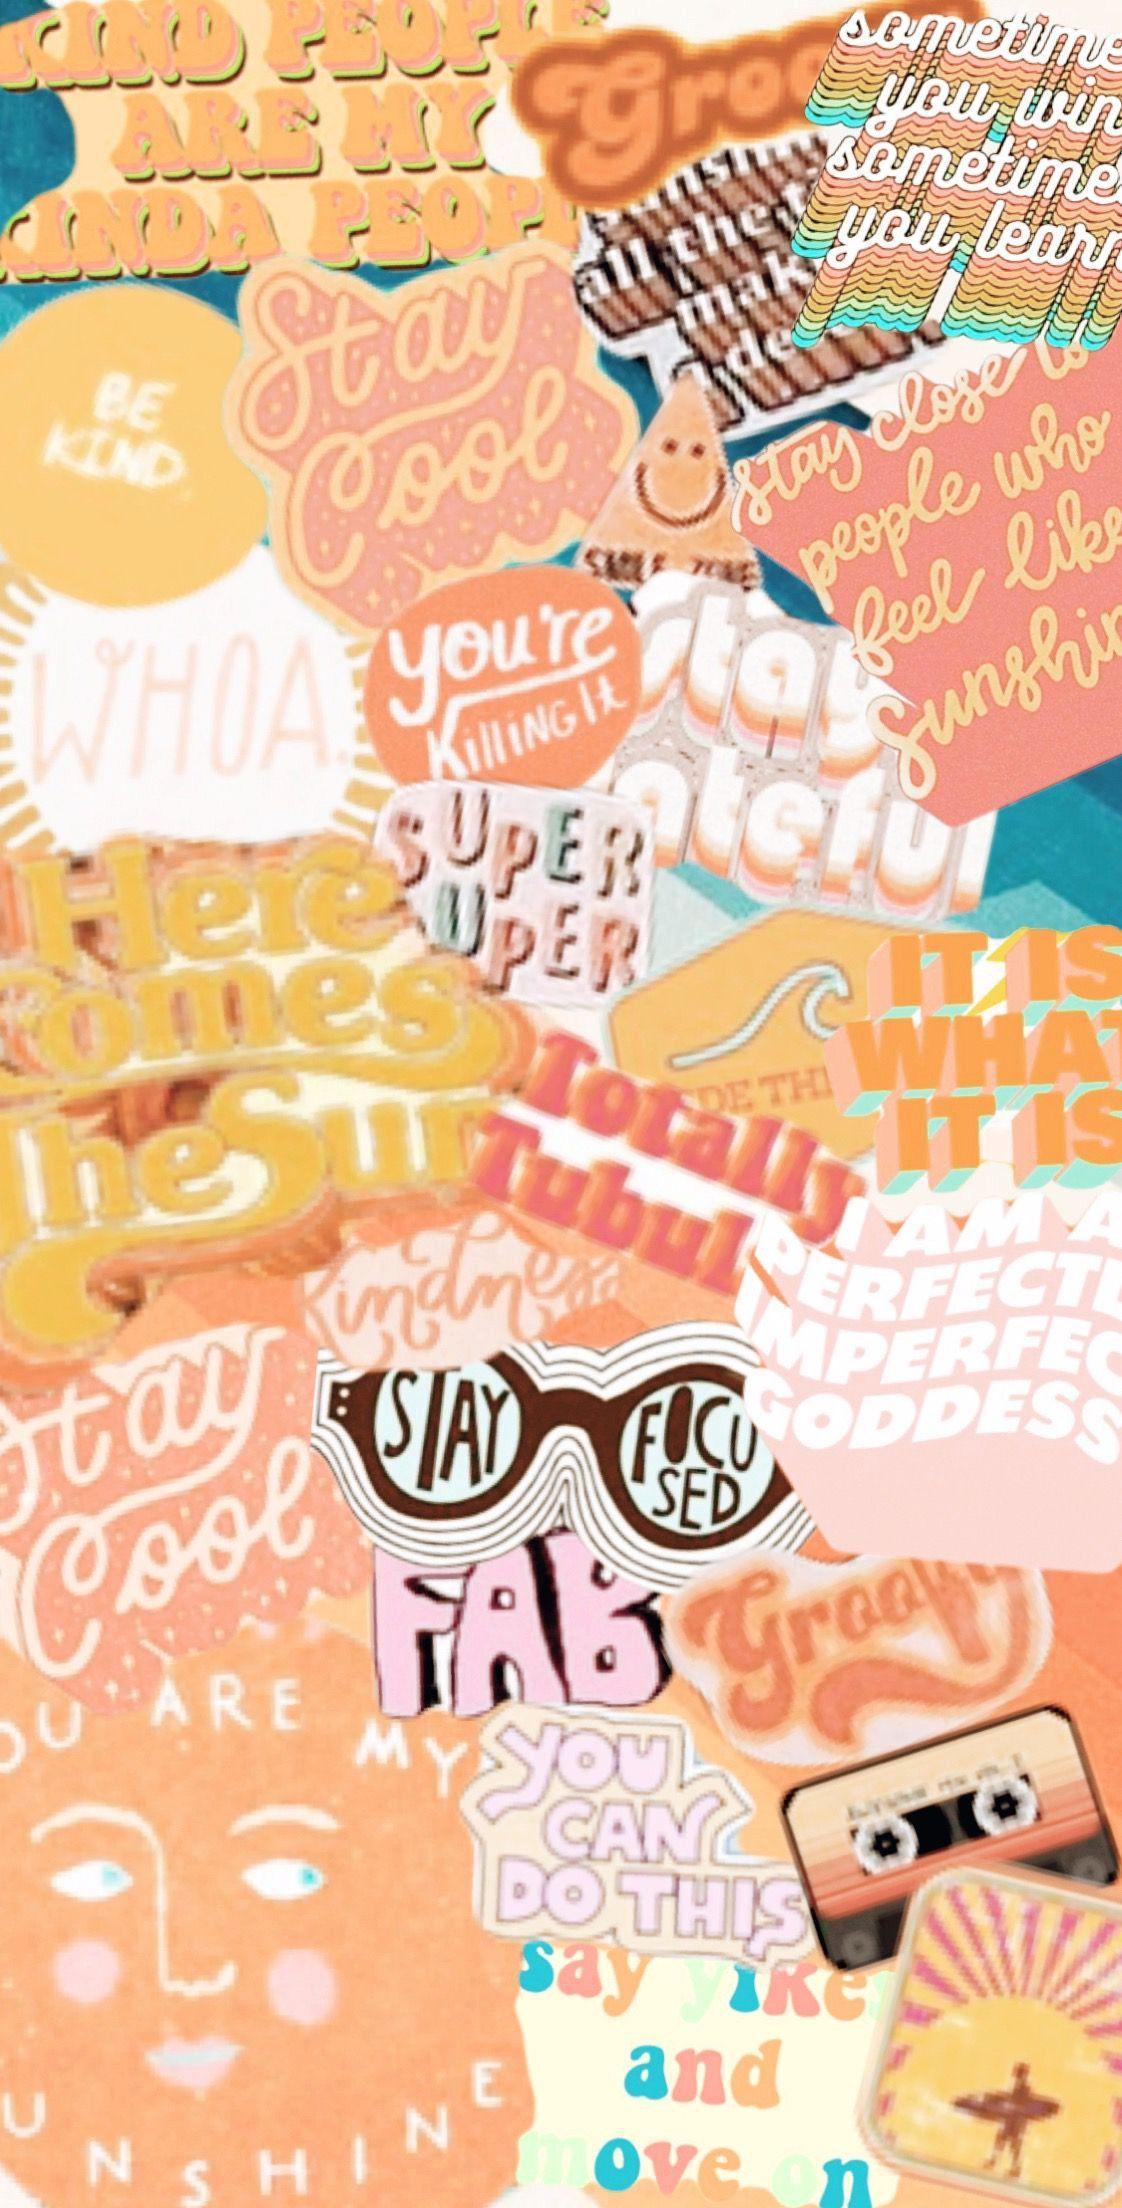 A collage of stickers with positive affirmations - Terracotta, VSCO, positive